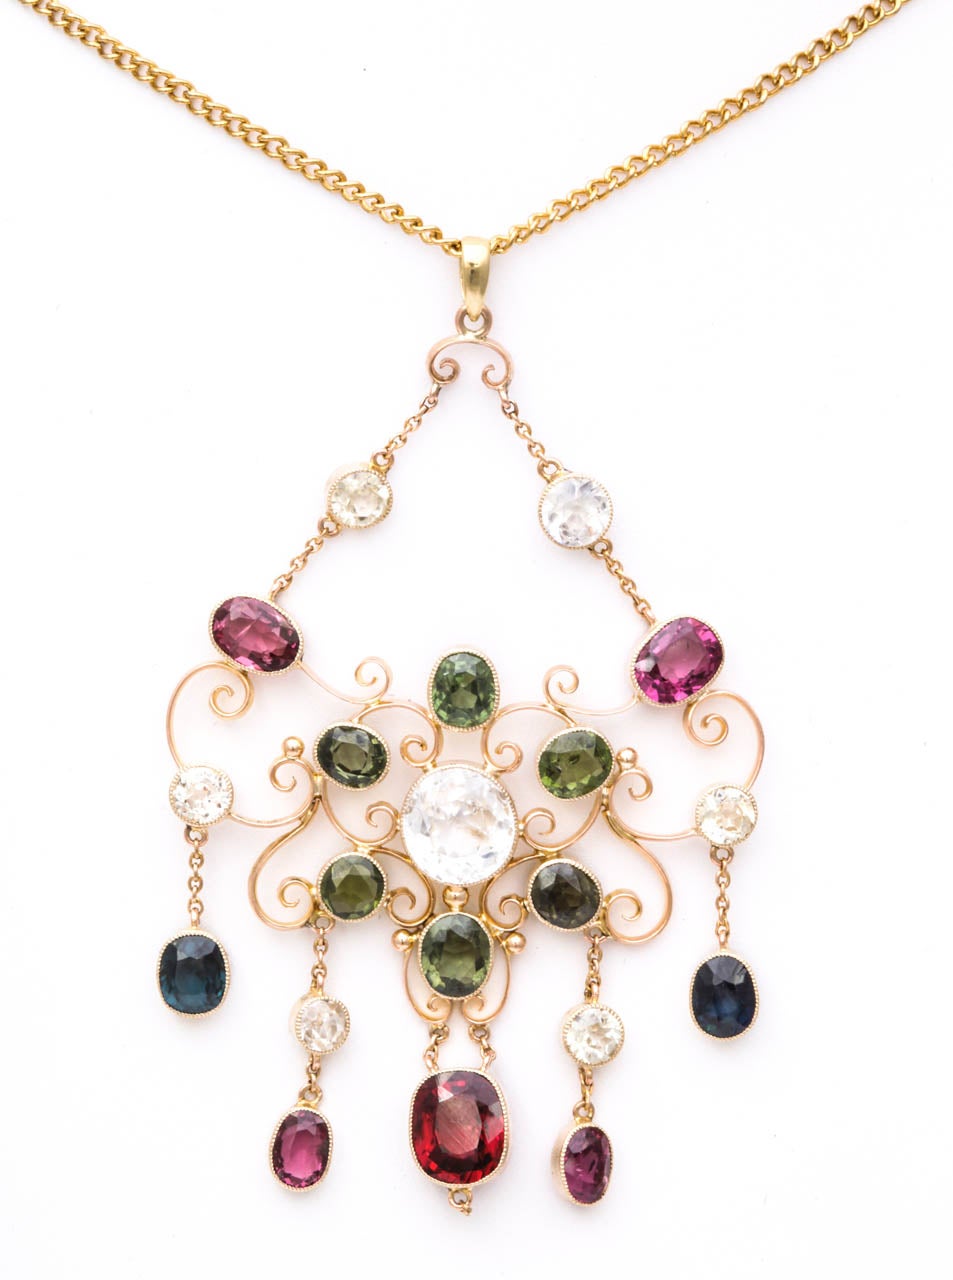 Warm color radiates from this graceful necklace, of English origin, The stones, set in 15kt gold are radiant garnets, white sapphires and natural smoky green zirconia. The beauty on the neck inspires admiration. Though Victorian c. 1880, the design